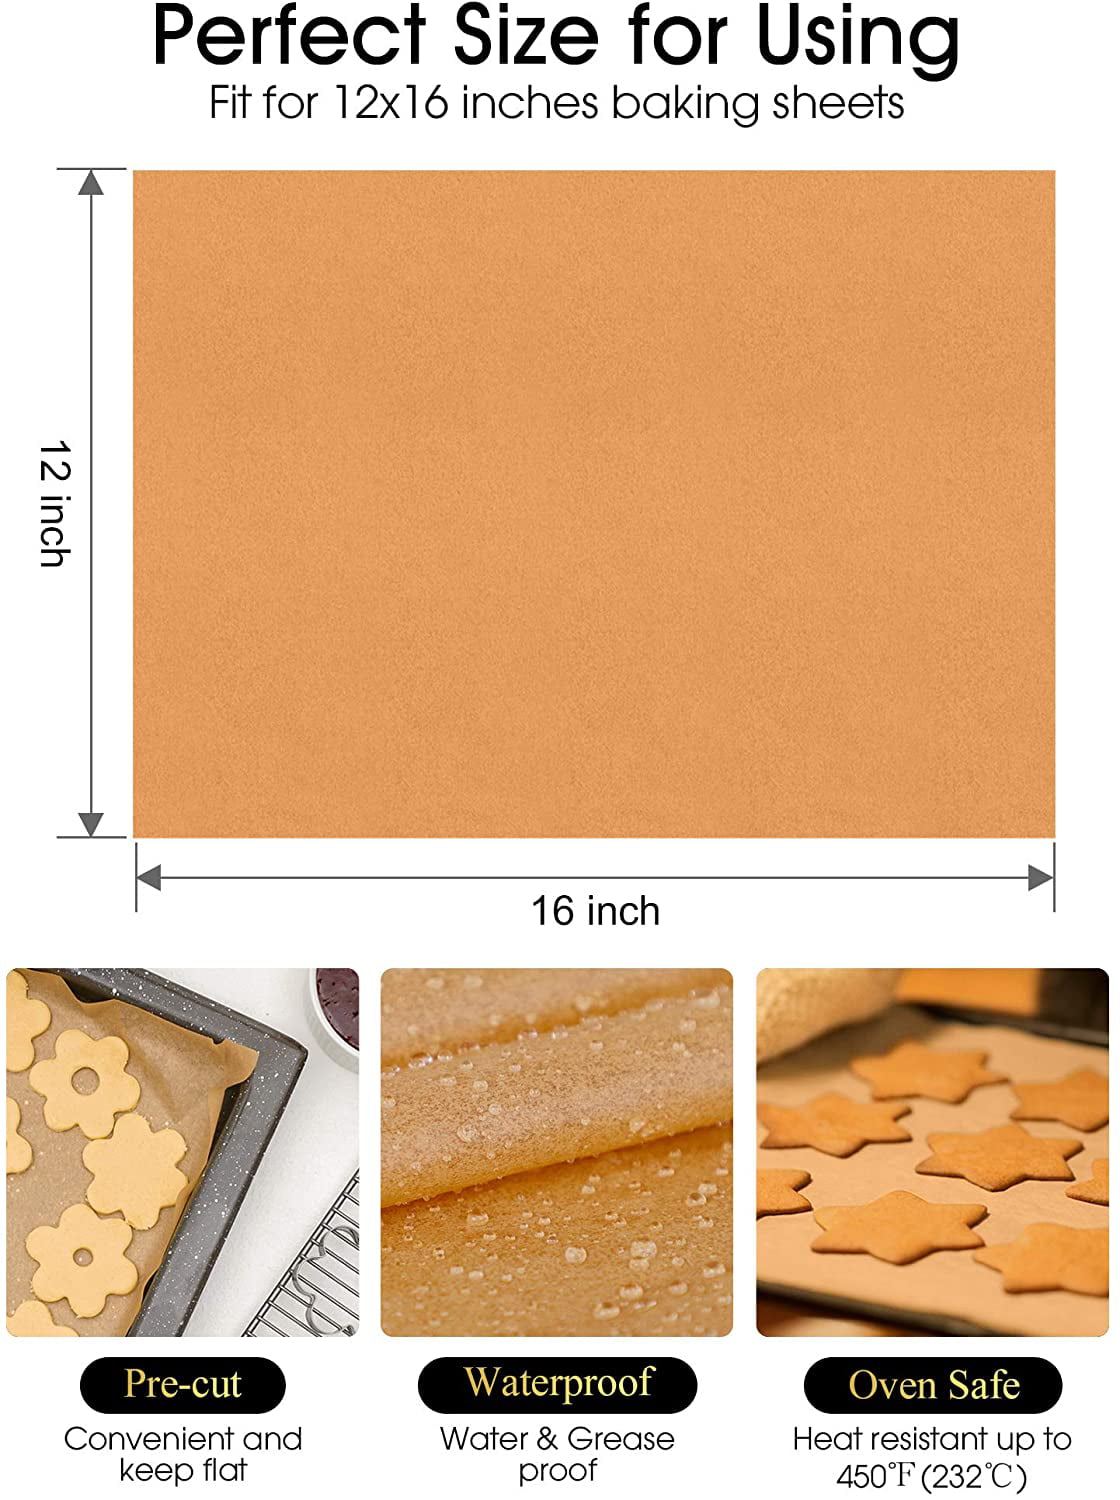  200-Pack Precut Parchment Paper Sheets 12 x 16 inches,  Unbleached Brown Nonstick Liners for Half Sheet Pan for Baking, Cooking,  Grilling, Air Fryer, Steaming, and Wrapping Food, Heavy Duty: Home 